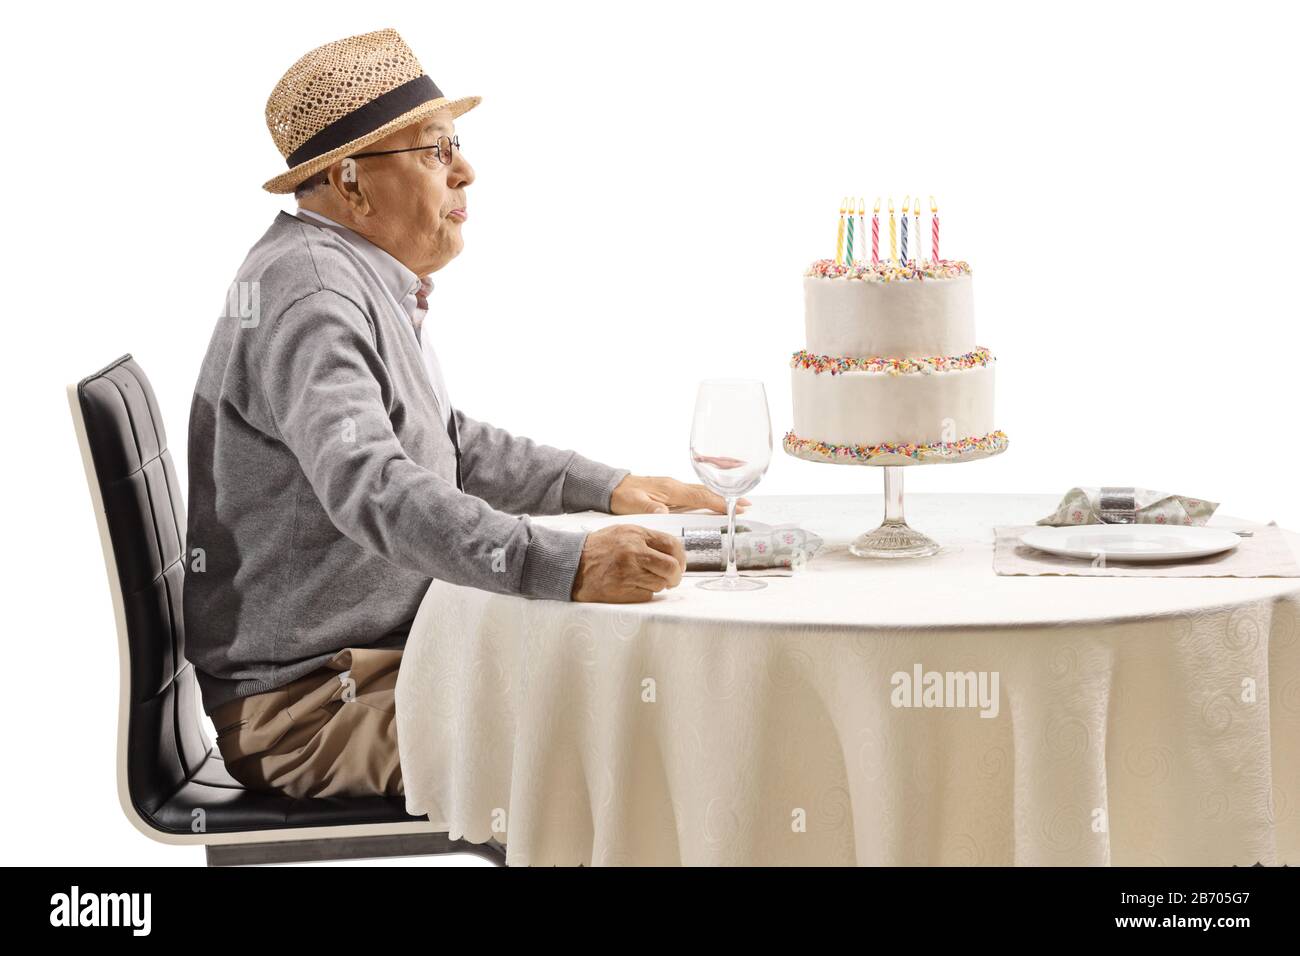 Elderly man blowing candles on a cake isolated on white background Stock Photo